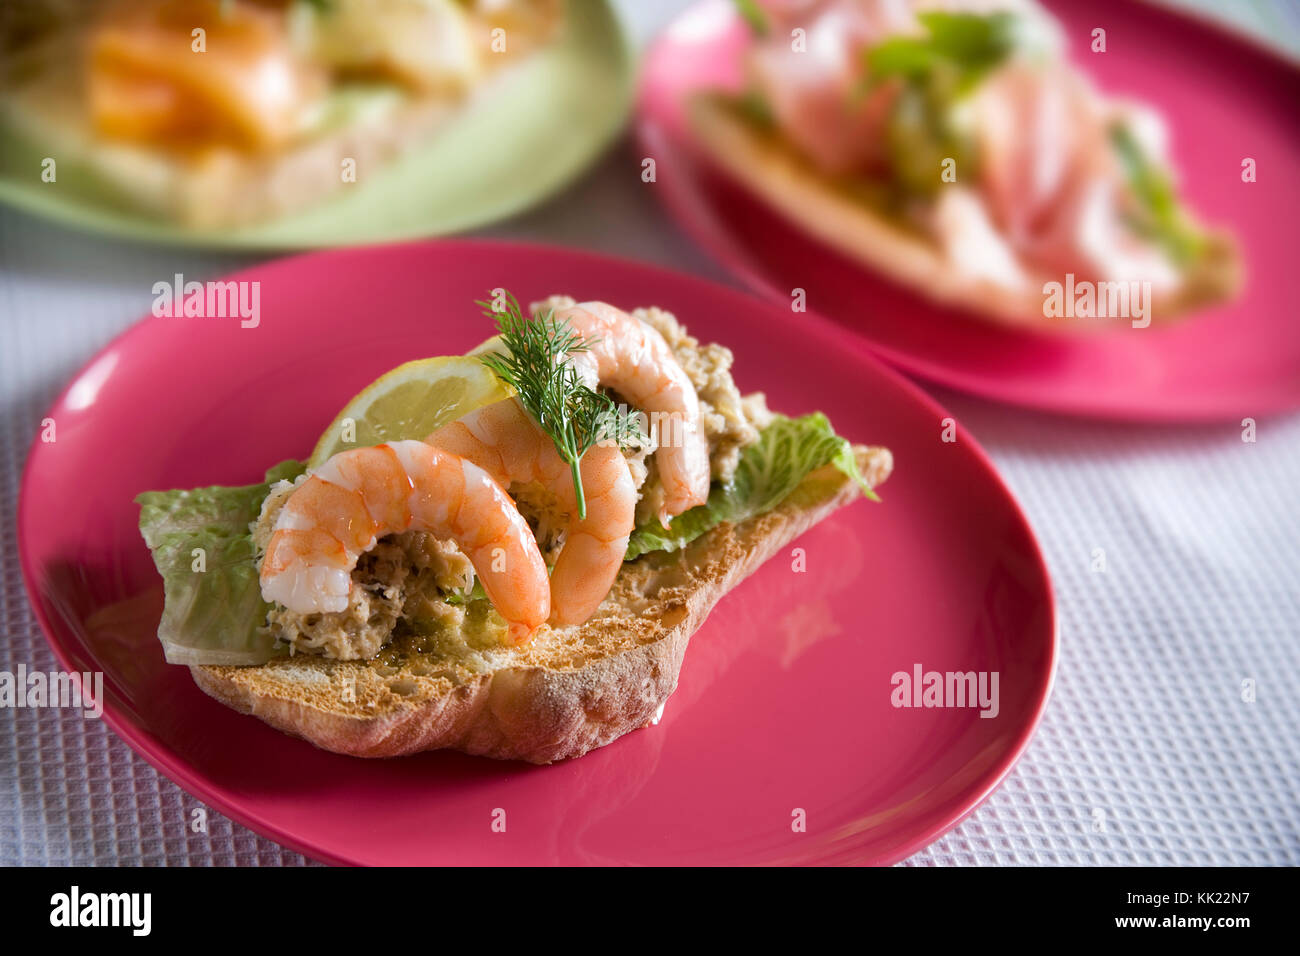 King prawn bruschetta with crab, lettuce, lemon, dill and olive oil served on colourful plate Stock Photo